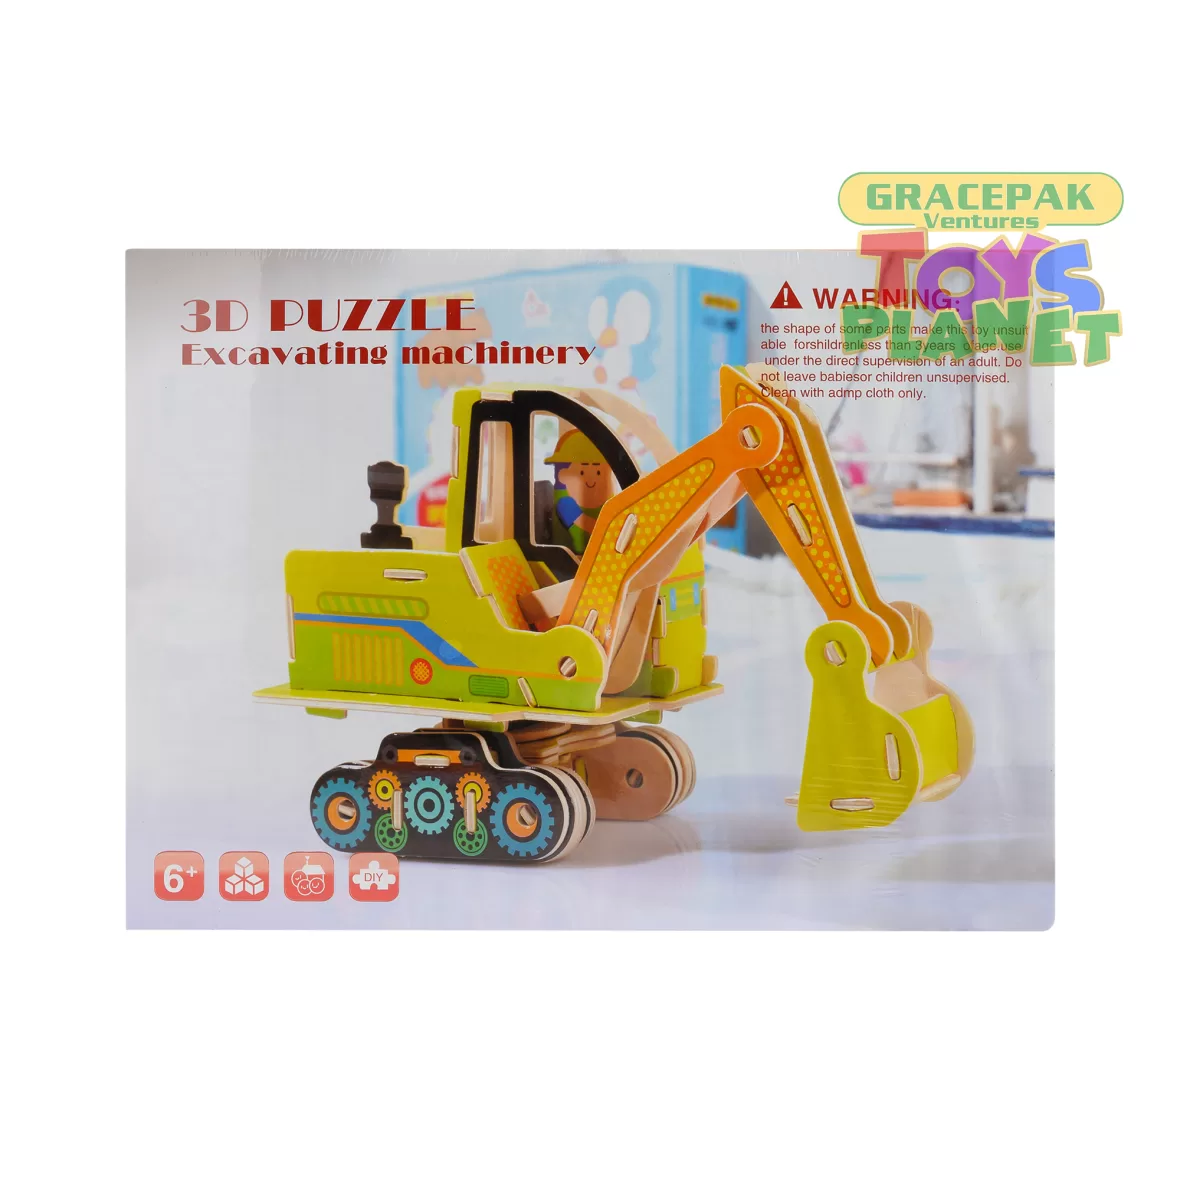 Wooden 3D Puzzle Excavating Machinery